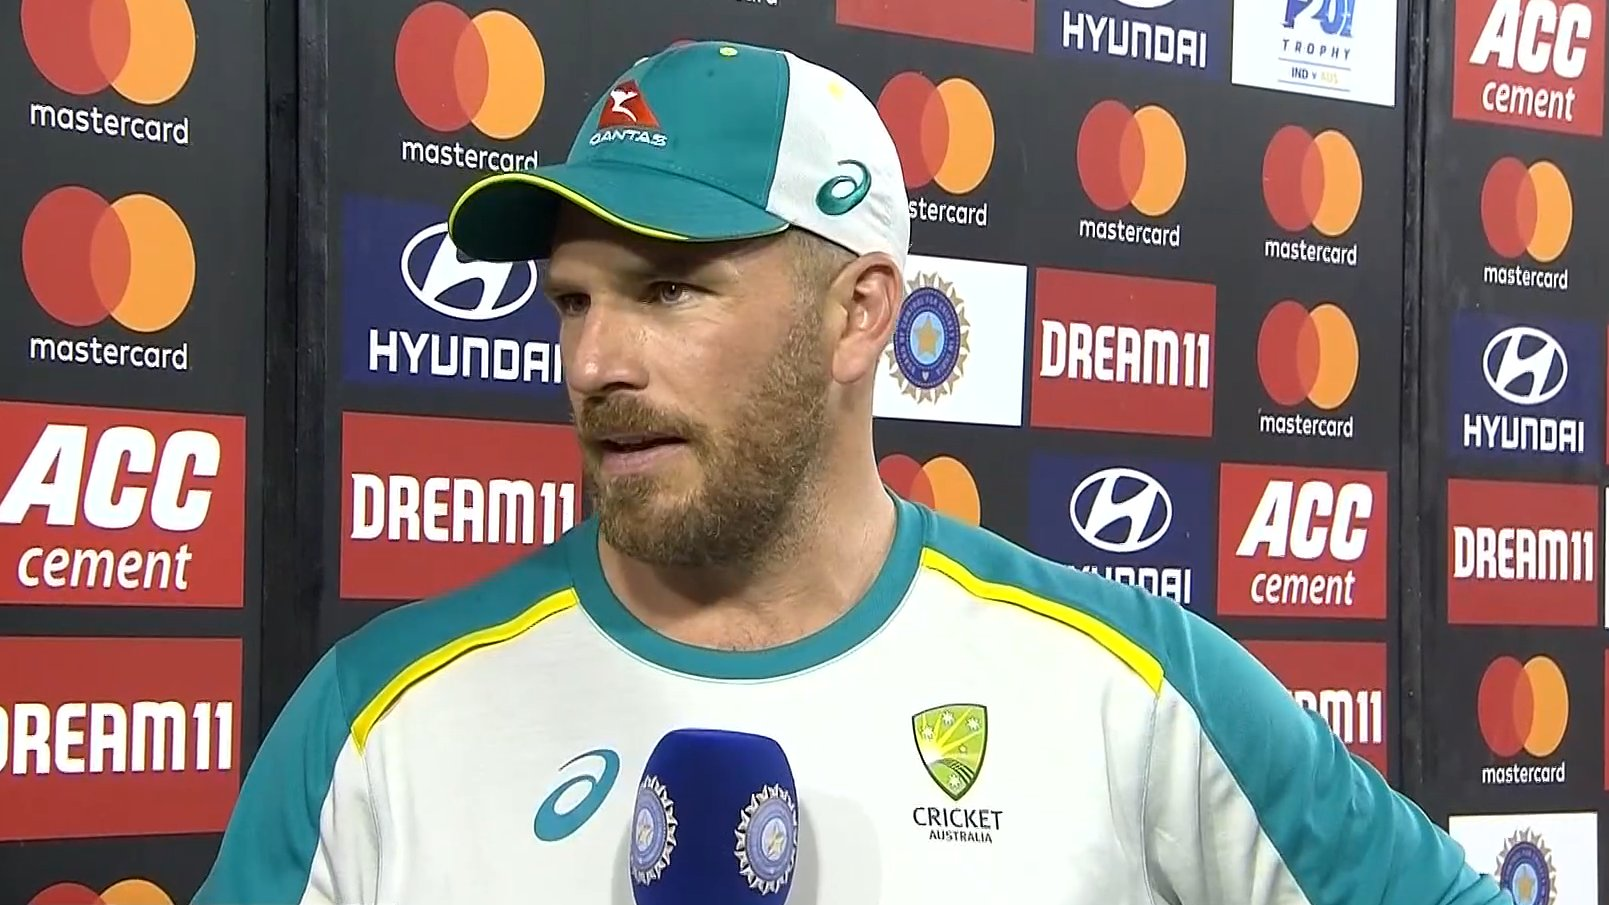 IND v AUS 2022: It was a good contest, says Aaron Finch after Australia's win in 1st T20I